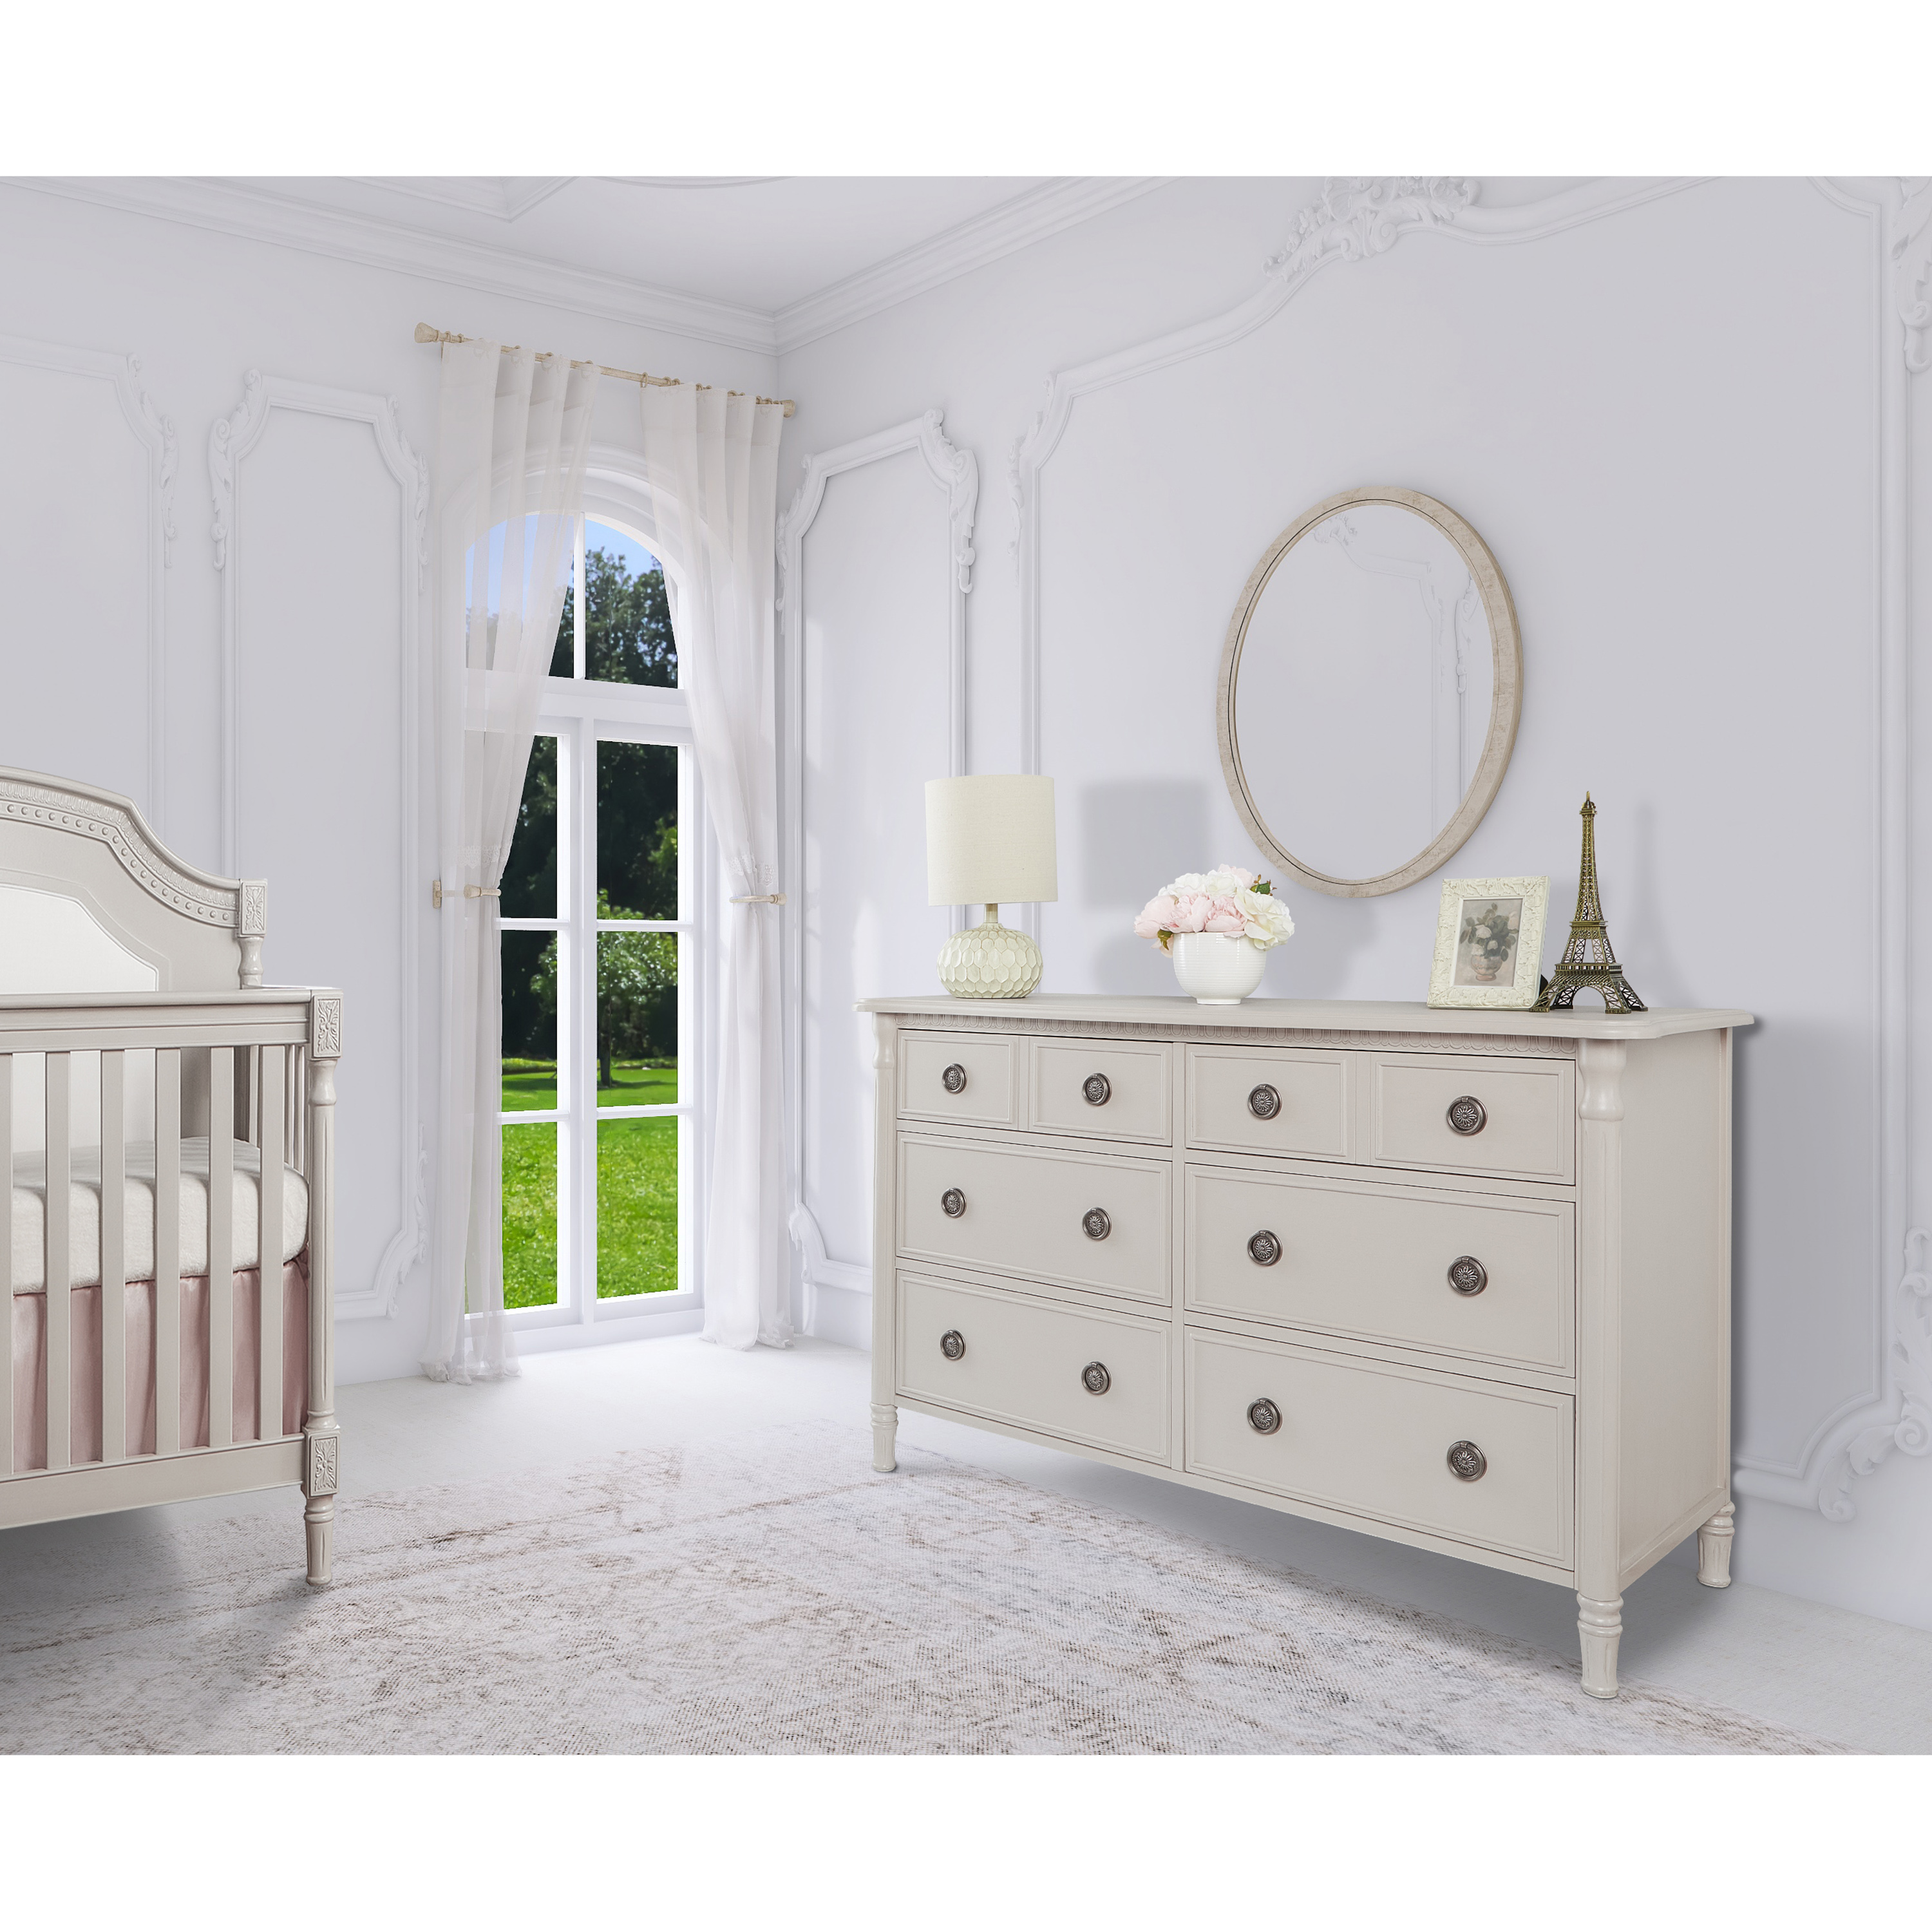 Evolur Nursery Essentials Bundle of Julienne 5-in-1 Convertible Crib, Julienne Double Dresser & London Upholstered 360 Swivel Glider, with a Premium Dream On Me Crib Mattress - image 4 of 11